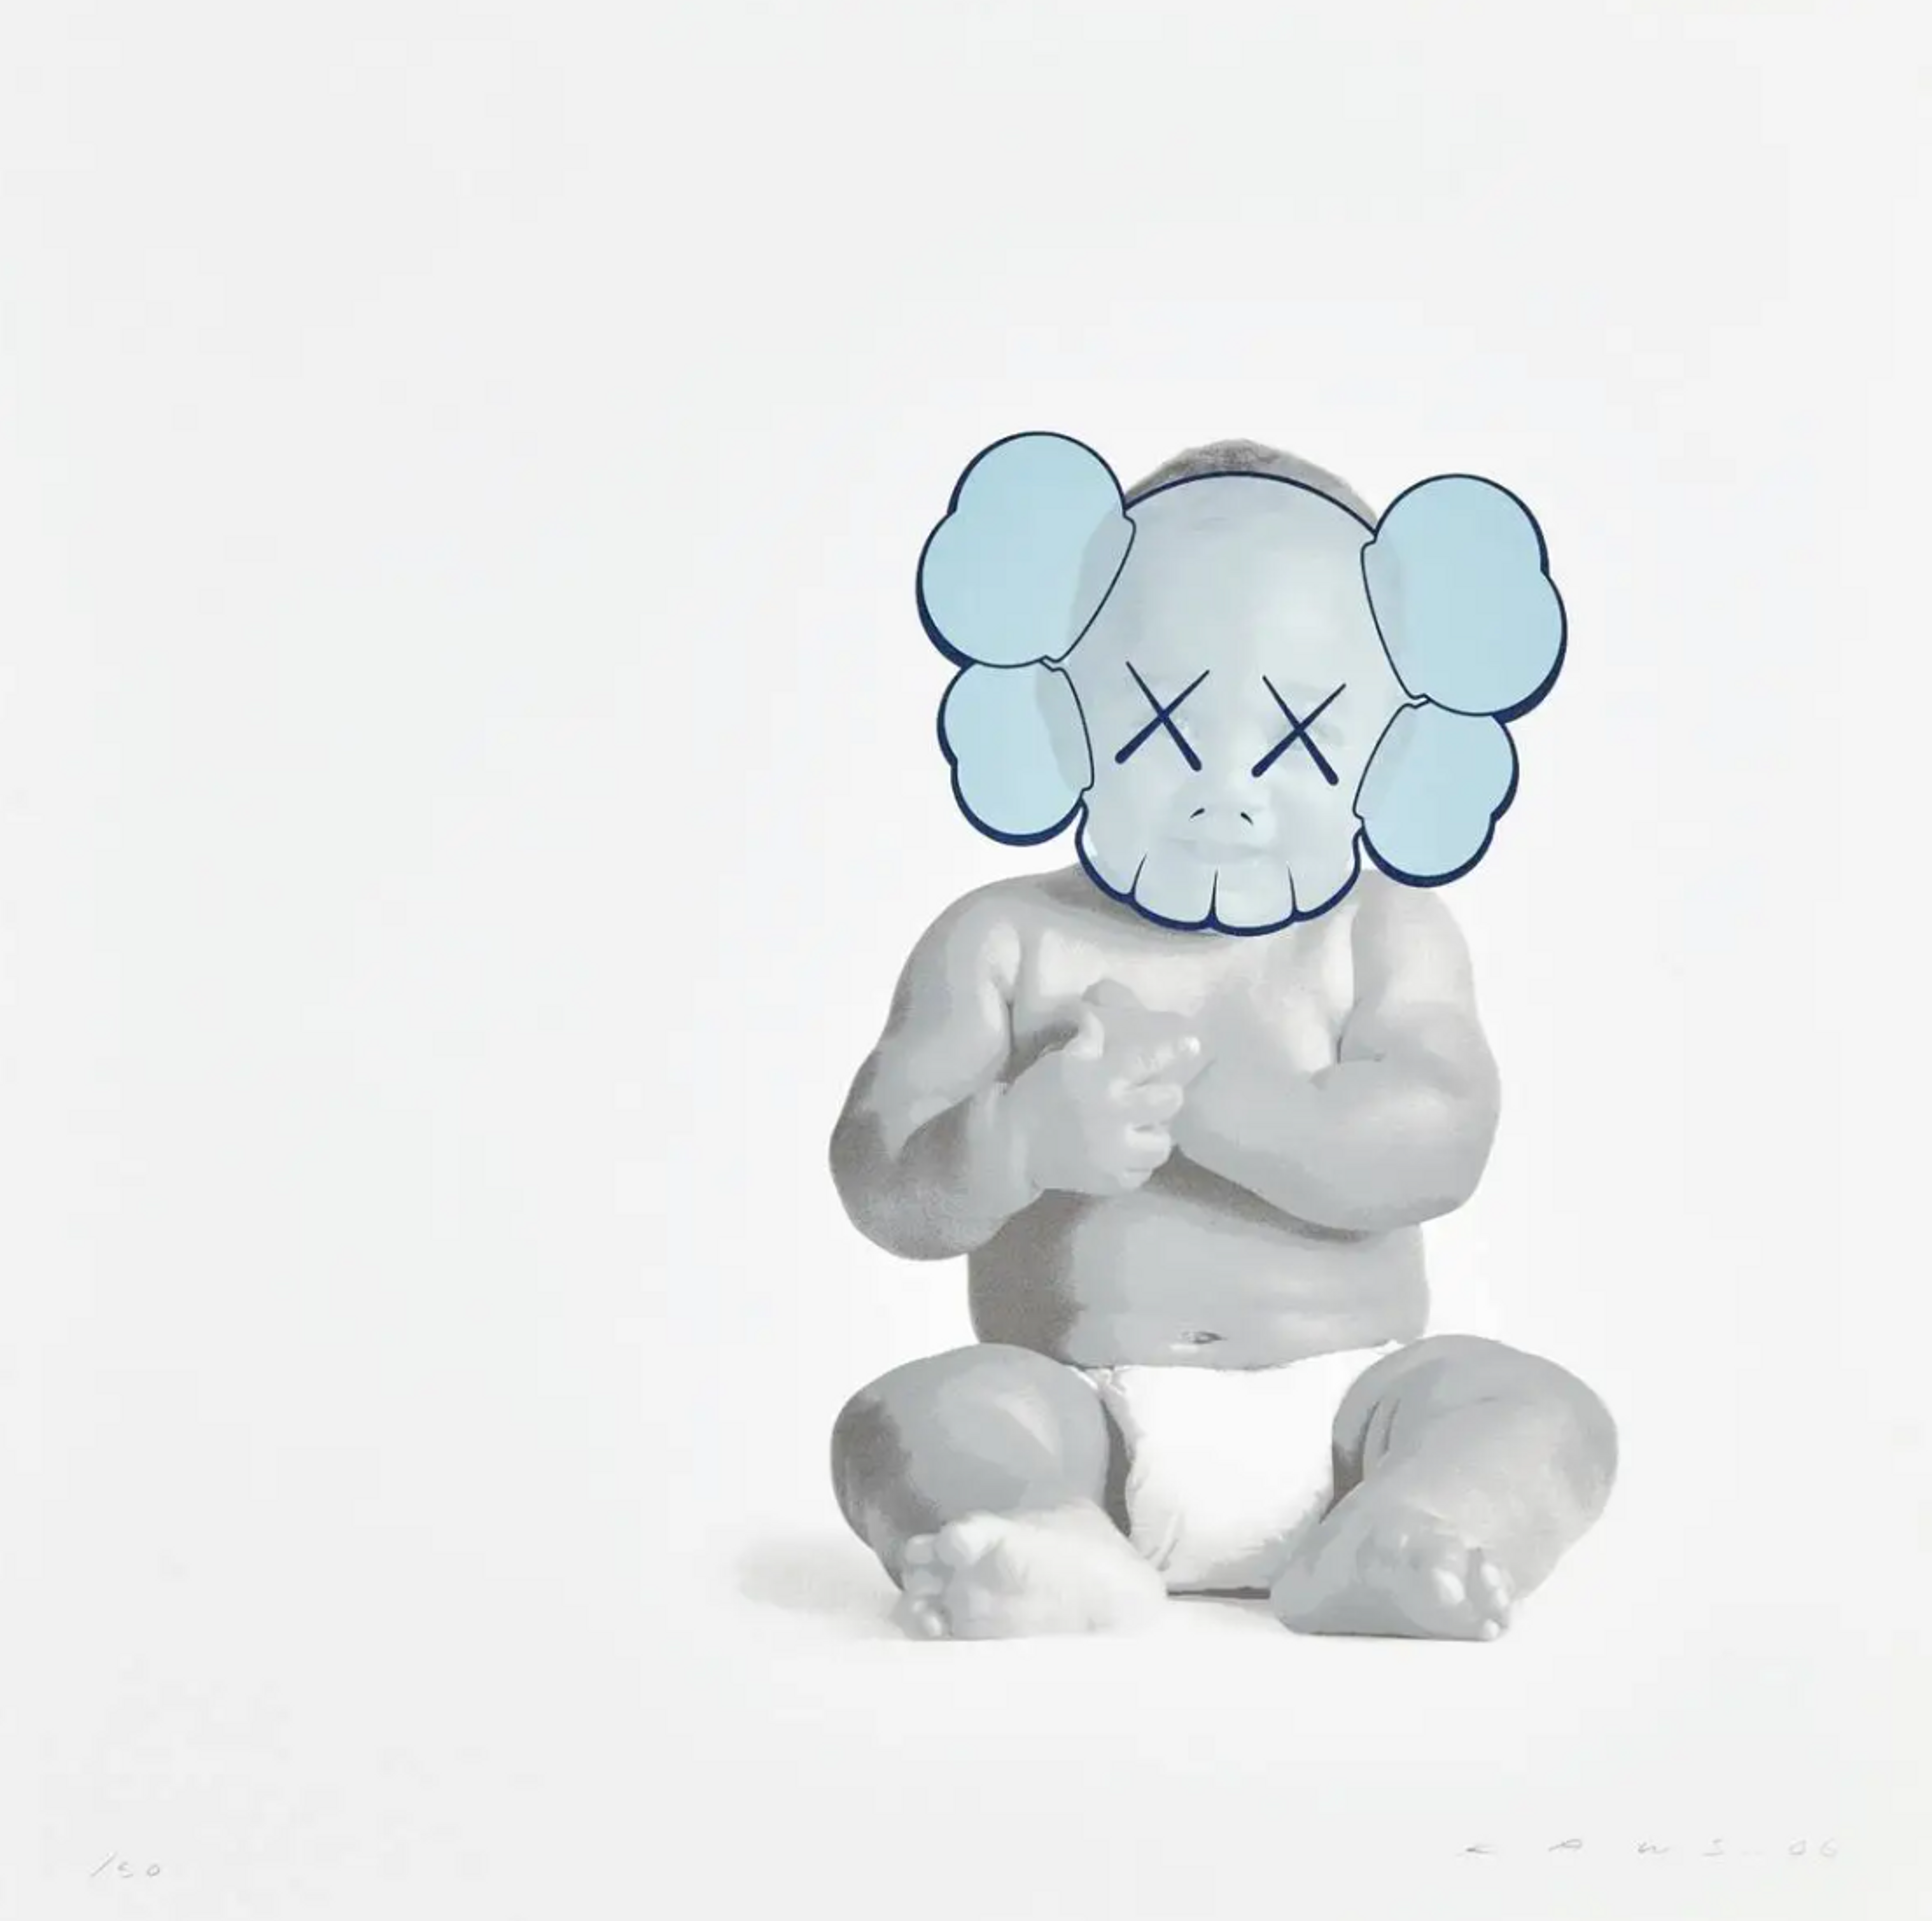 Under The Hammer: Top Prices Paid For KAWS At Auction